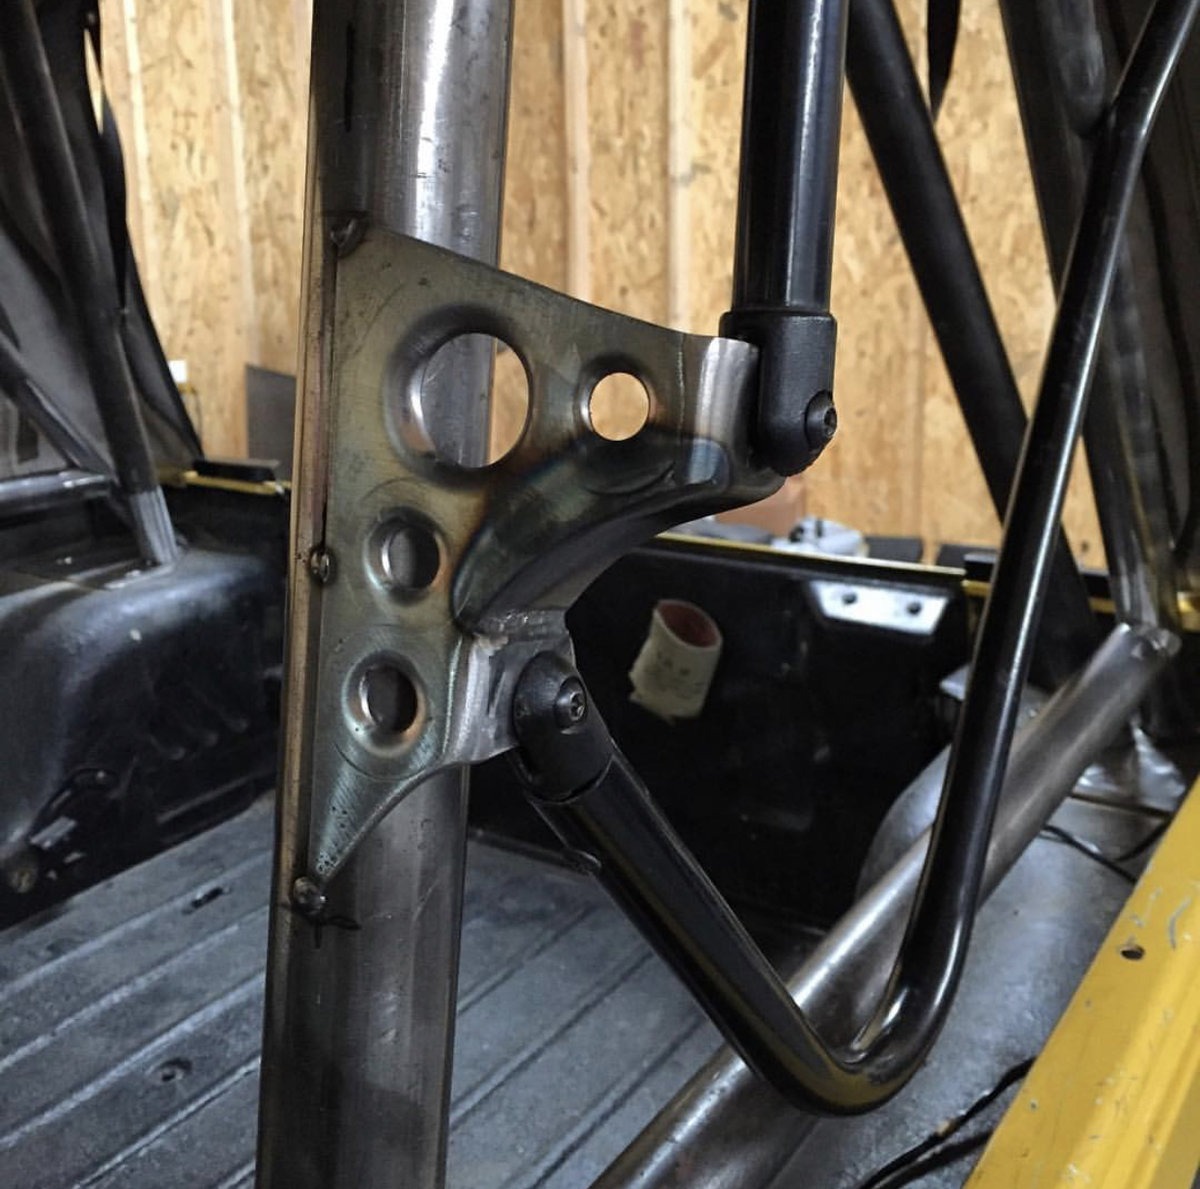 Roll cage questions Jeep Wrangler TJ Forum